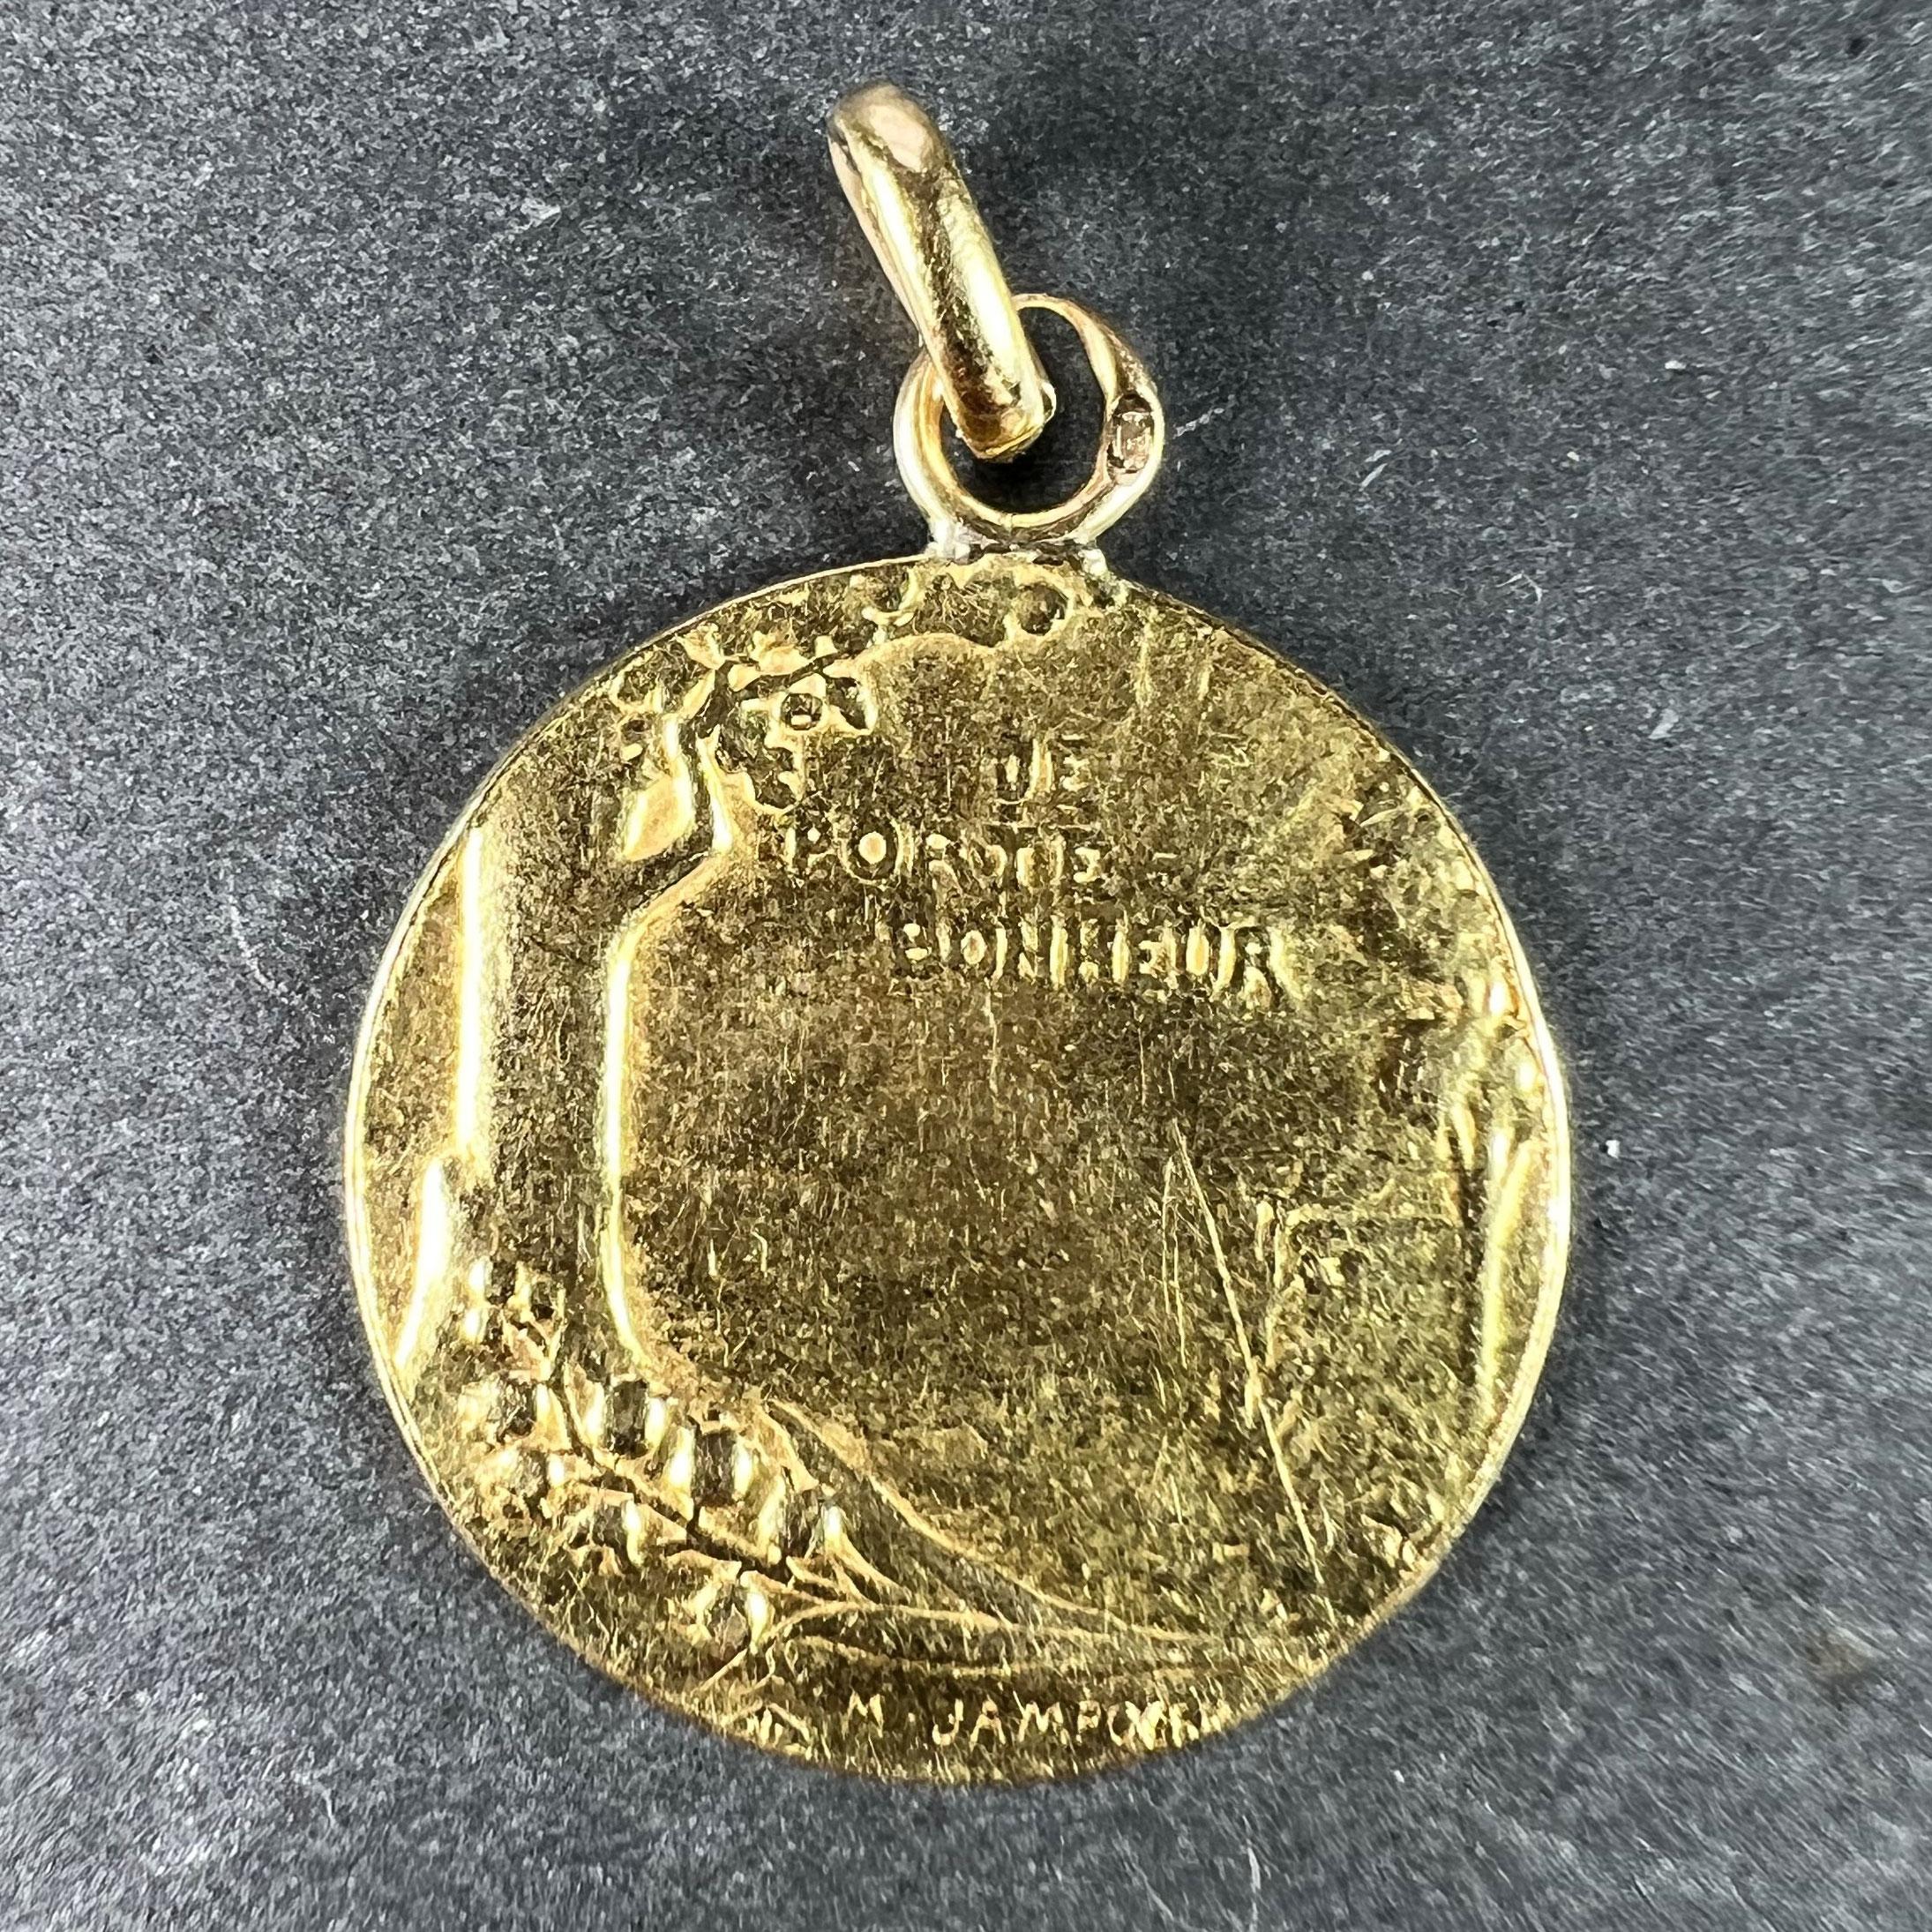 A French 18 karat (18K) yellow gold lucky charm pendant designed as a medal depicting a sunrise over a pastoral scene with lilies of the valley under an oak tree bearing a pair of acorns, with the phrase 'Je Porte Bonheur' (meaning 'I bring good